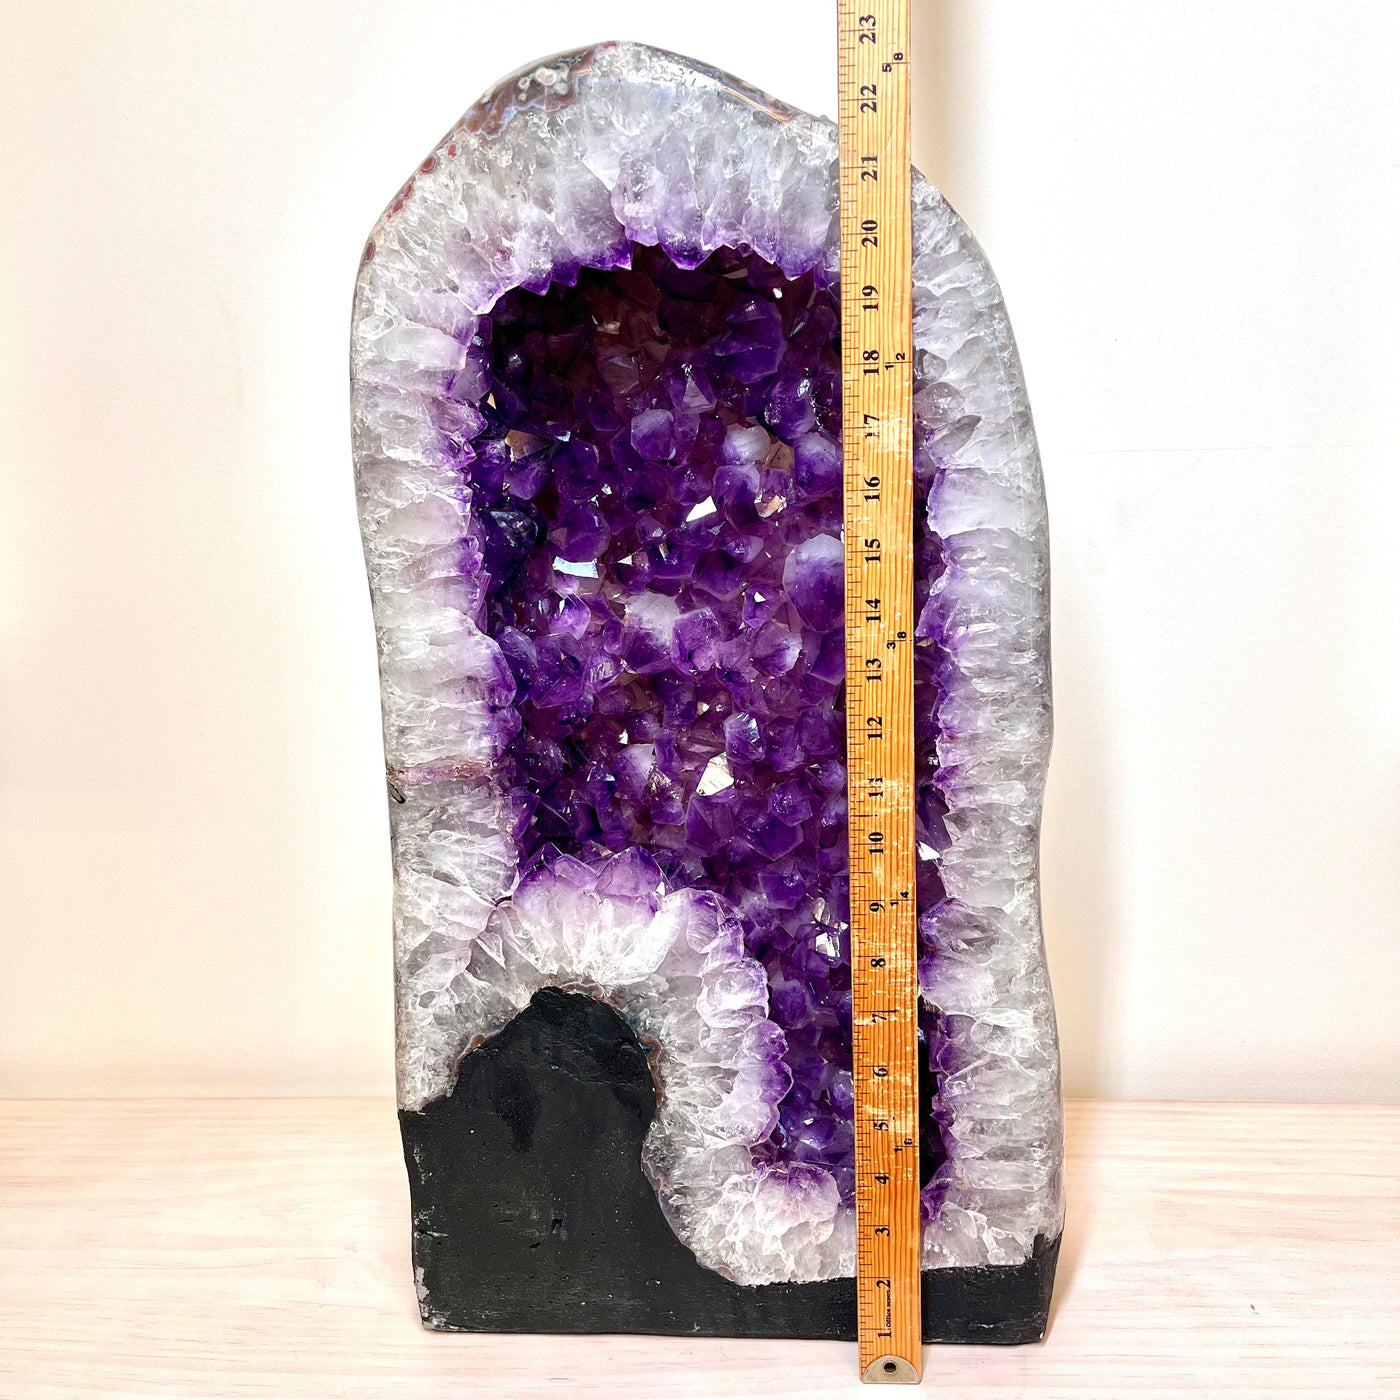 Frontal view of the Polished Amethyst Geode Cathedral, next to an upright yard stick for height reference.